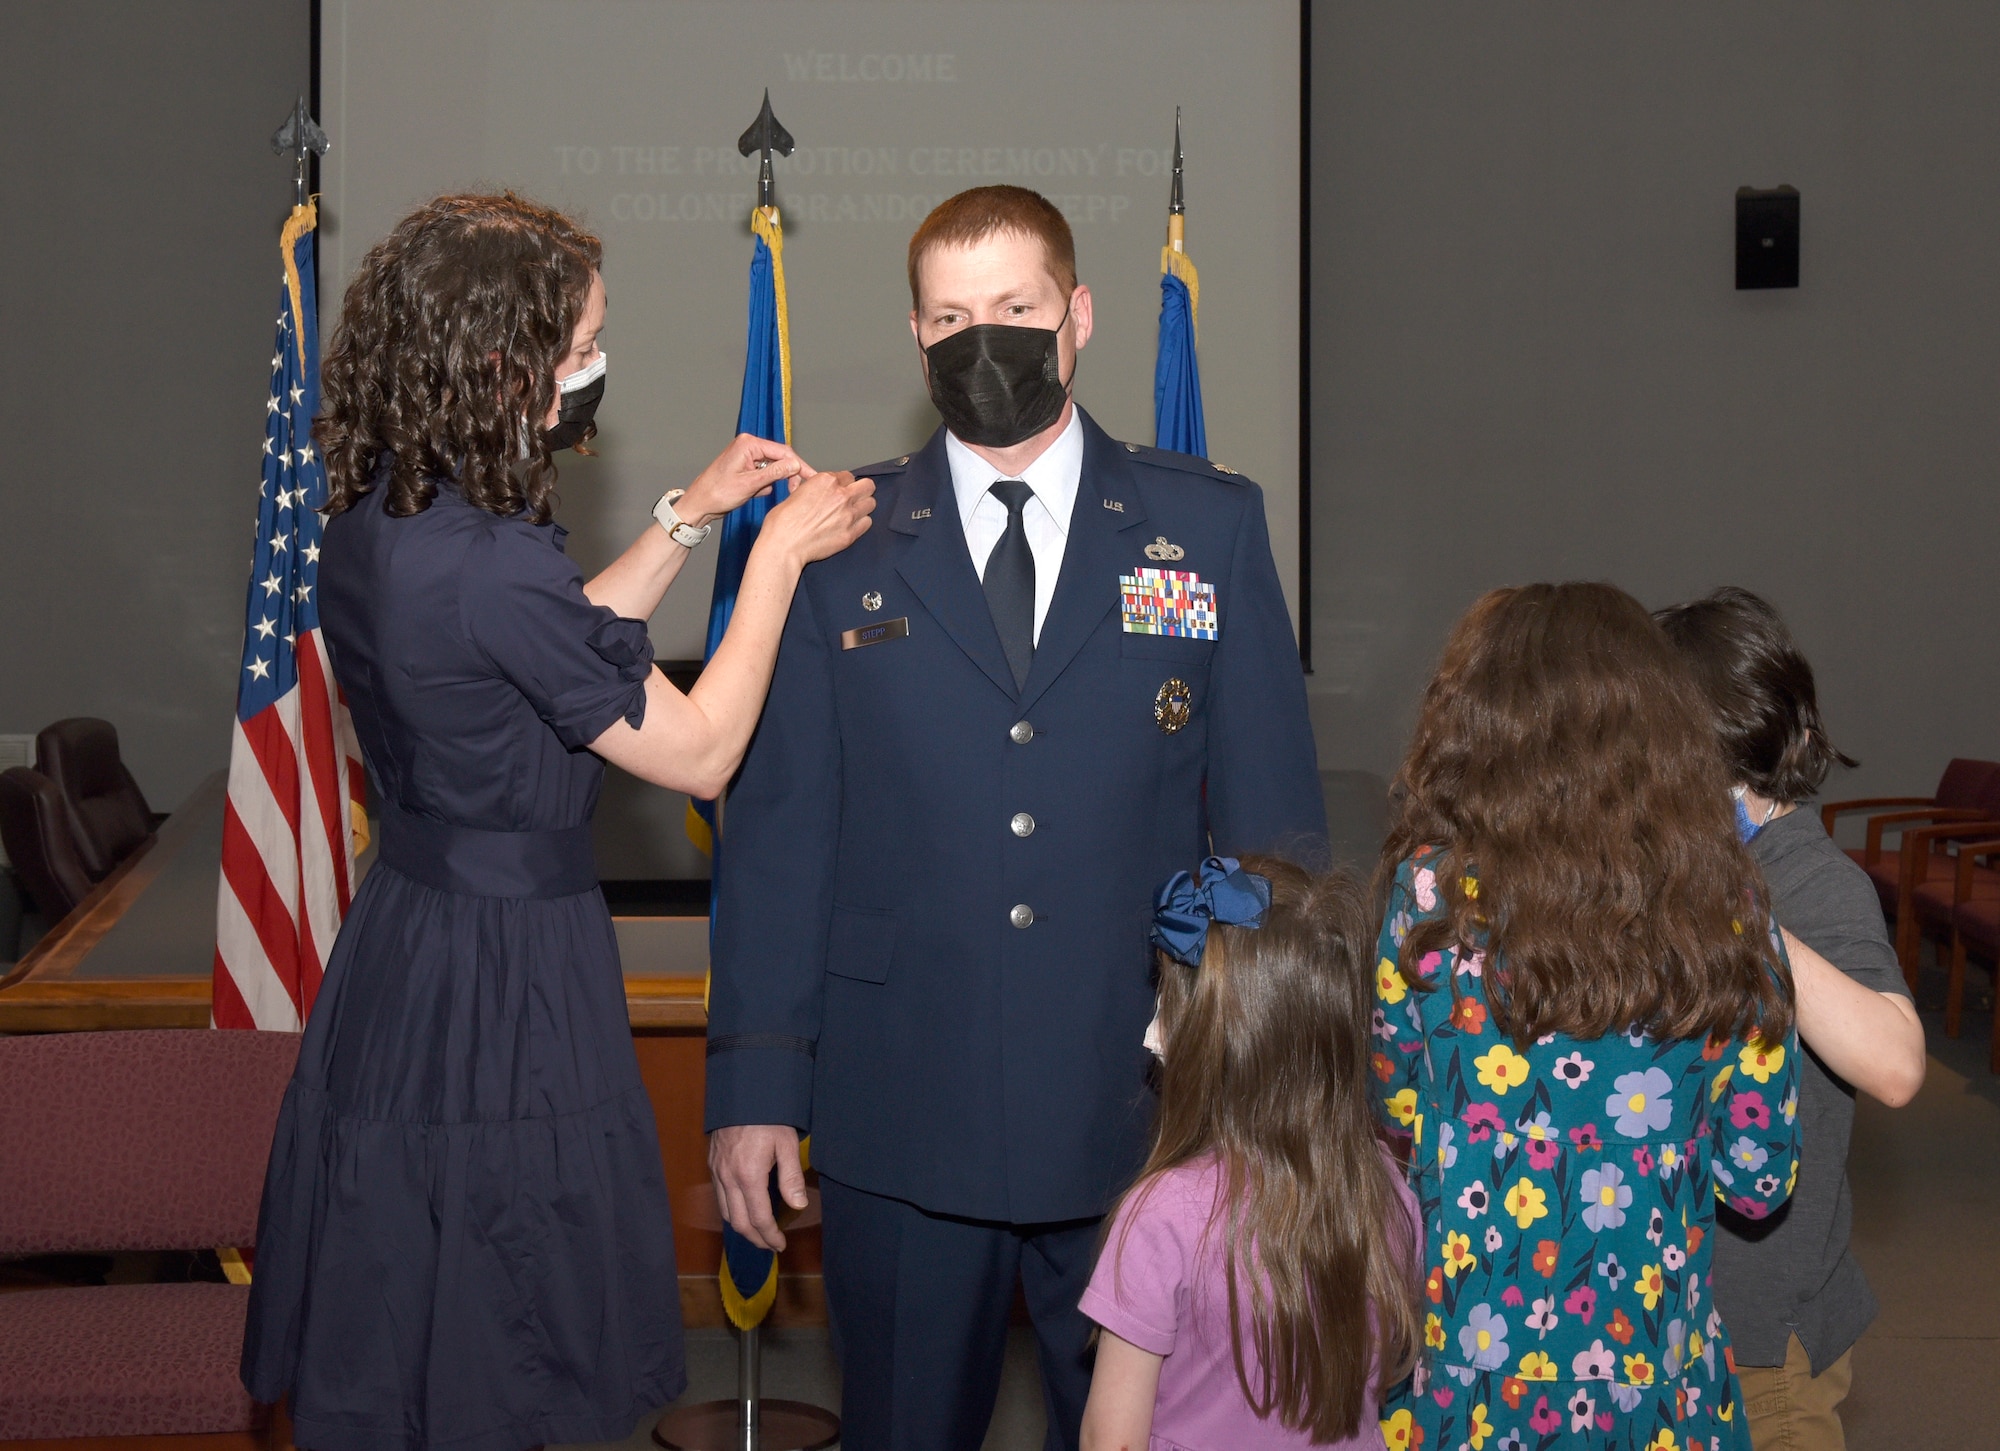 Colonel Stepp's family pins on his new rank